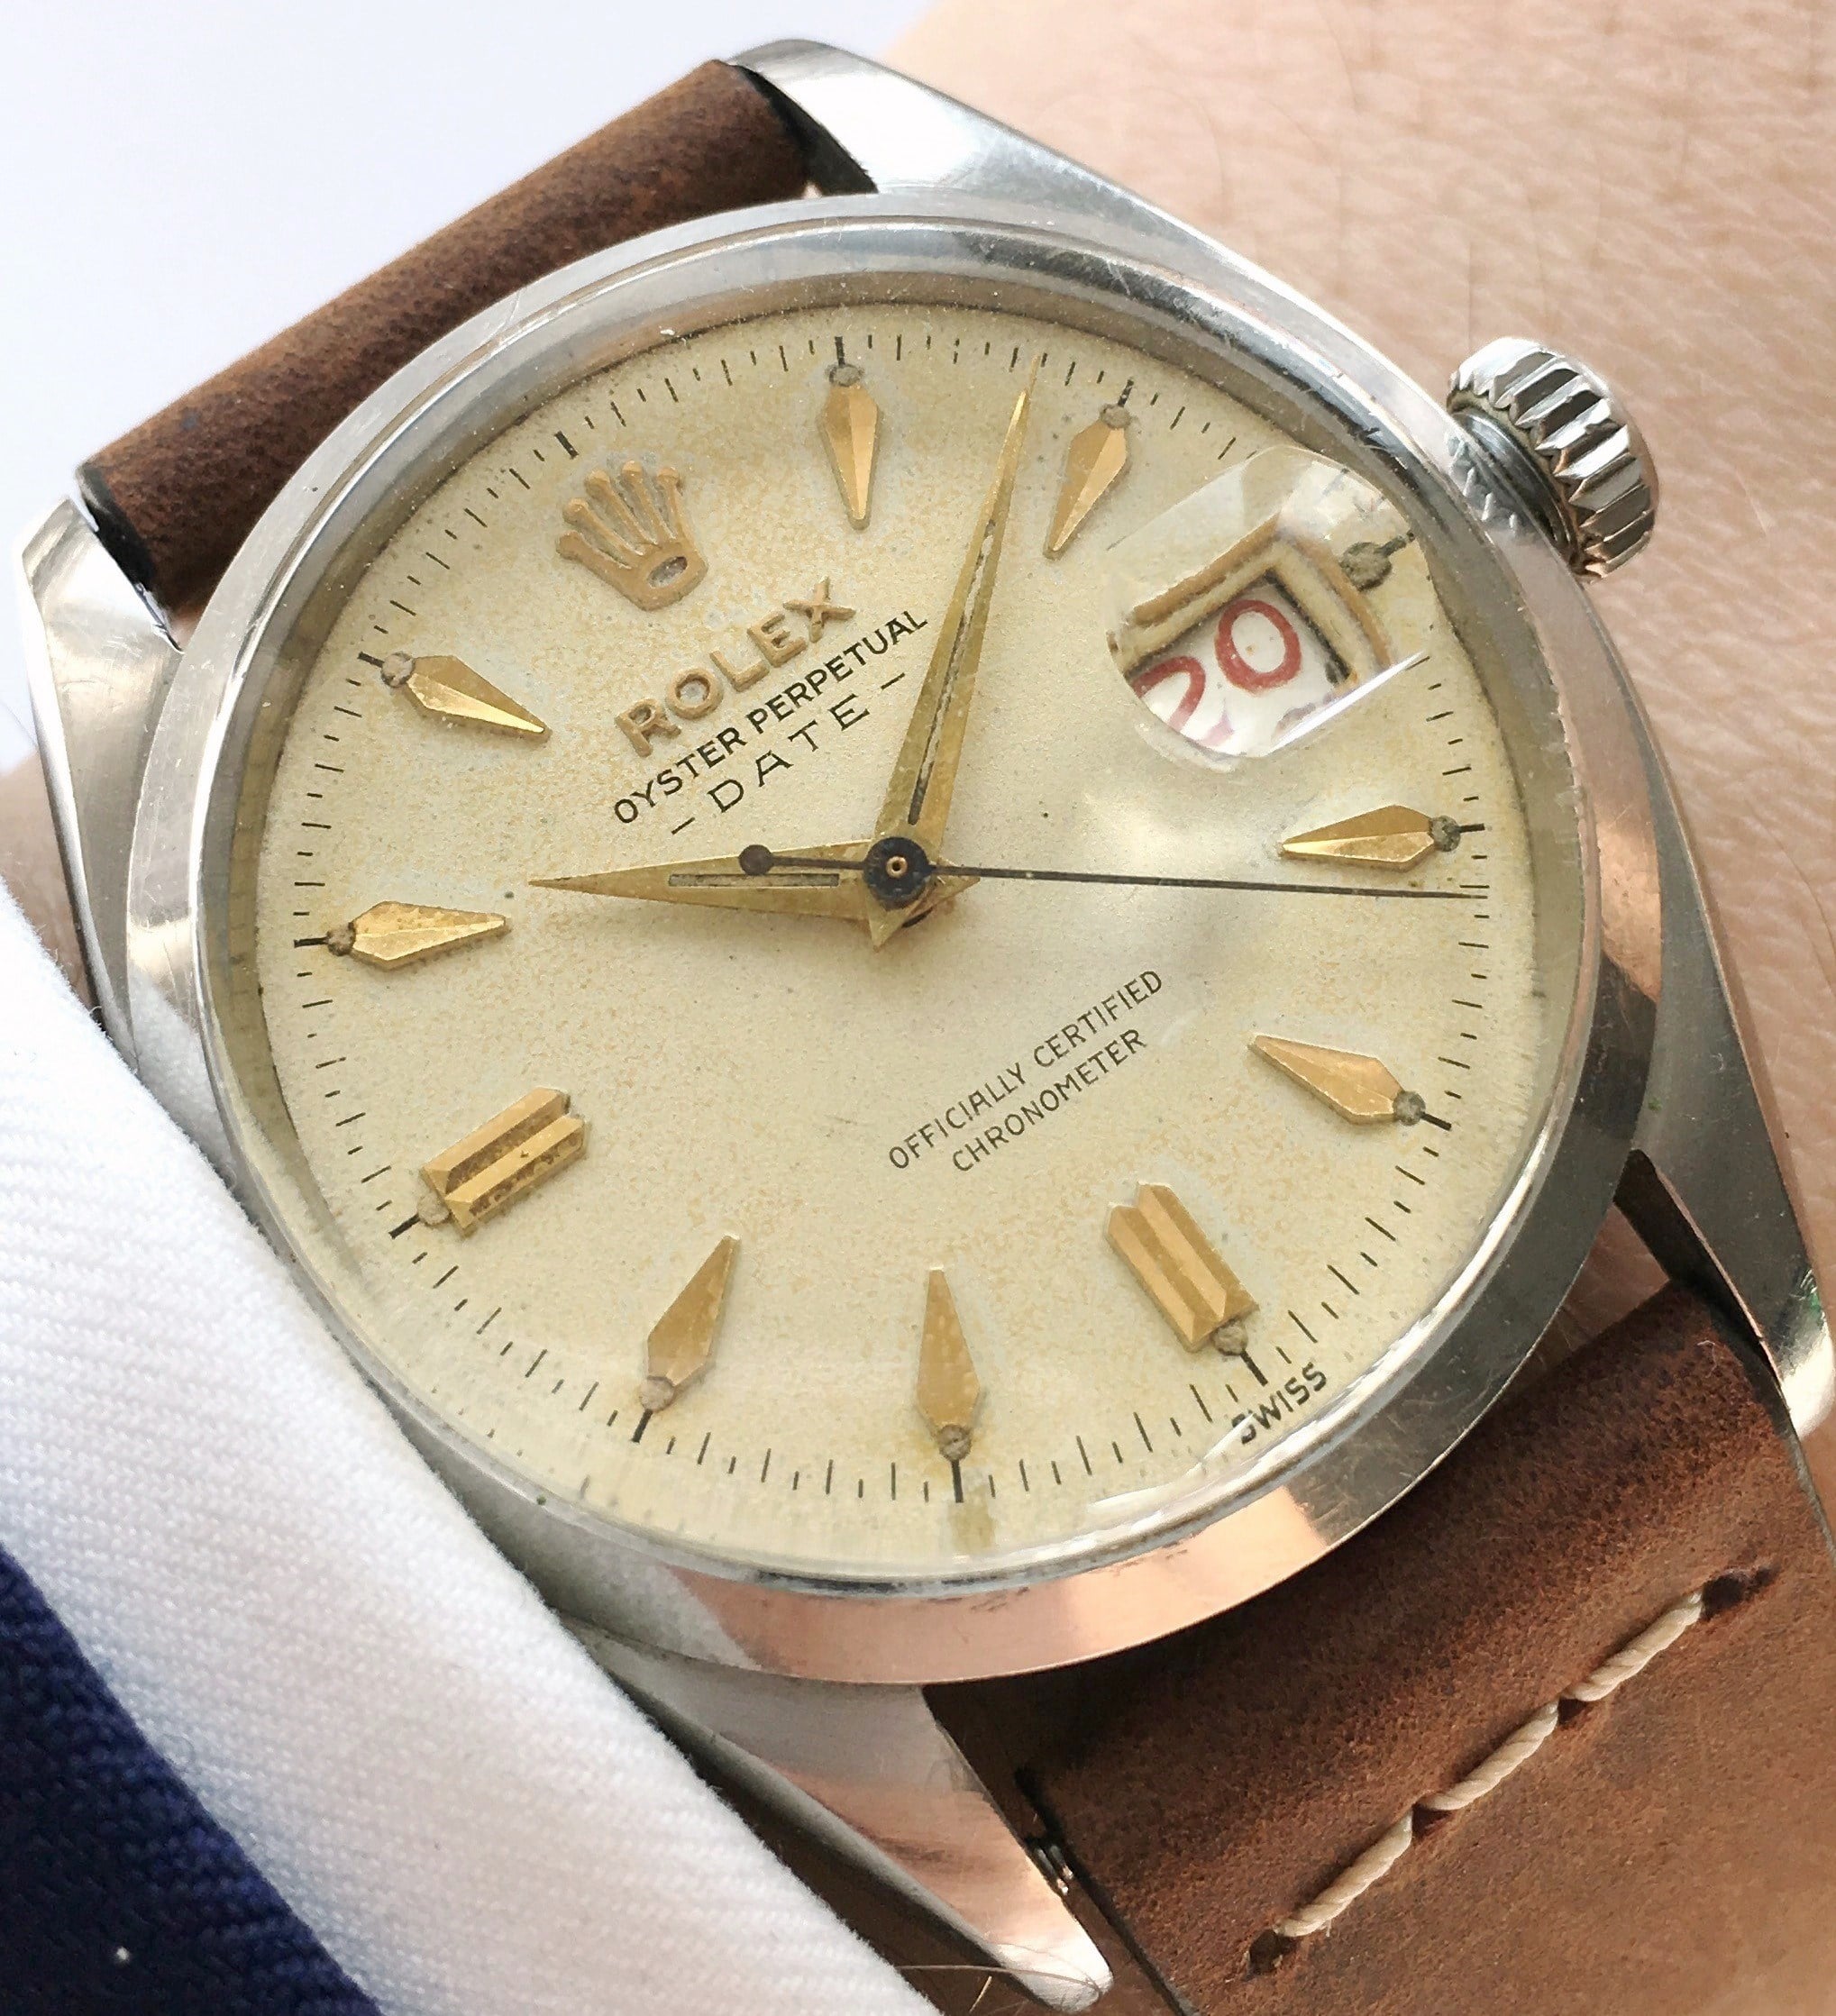 rolex oyster perpetual leather strap price